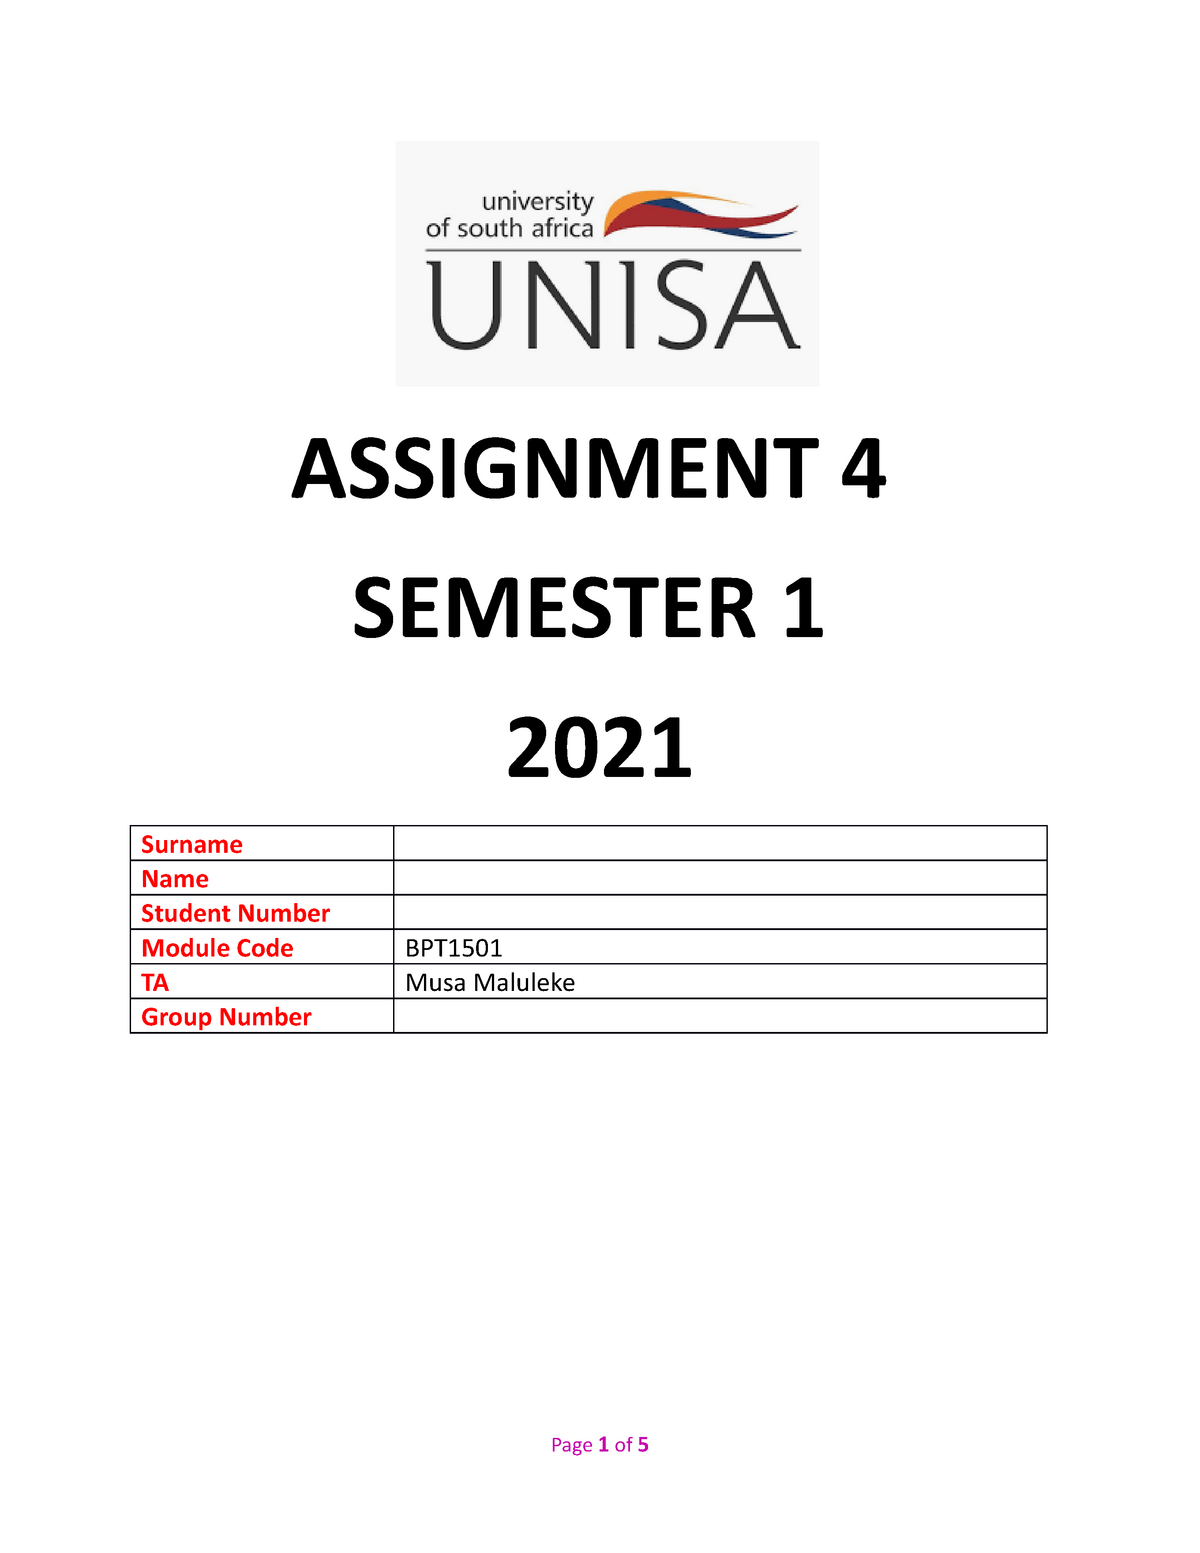 template-for-assignment-4-2021-assignment-4-semester-1-2021-surname